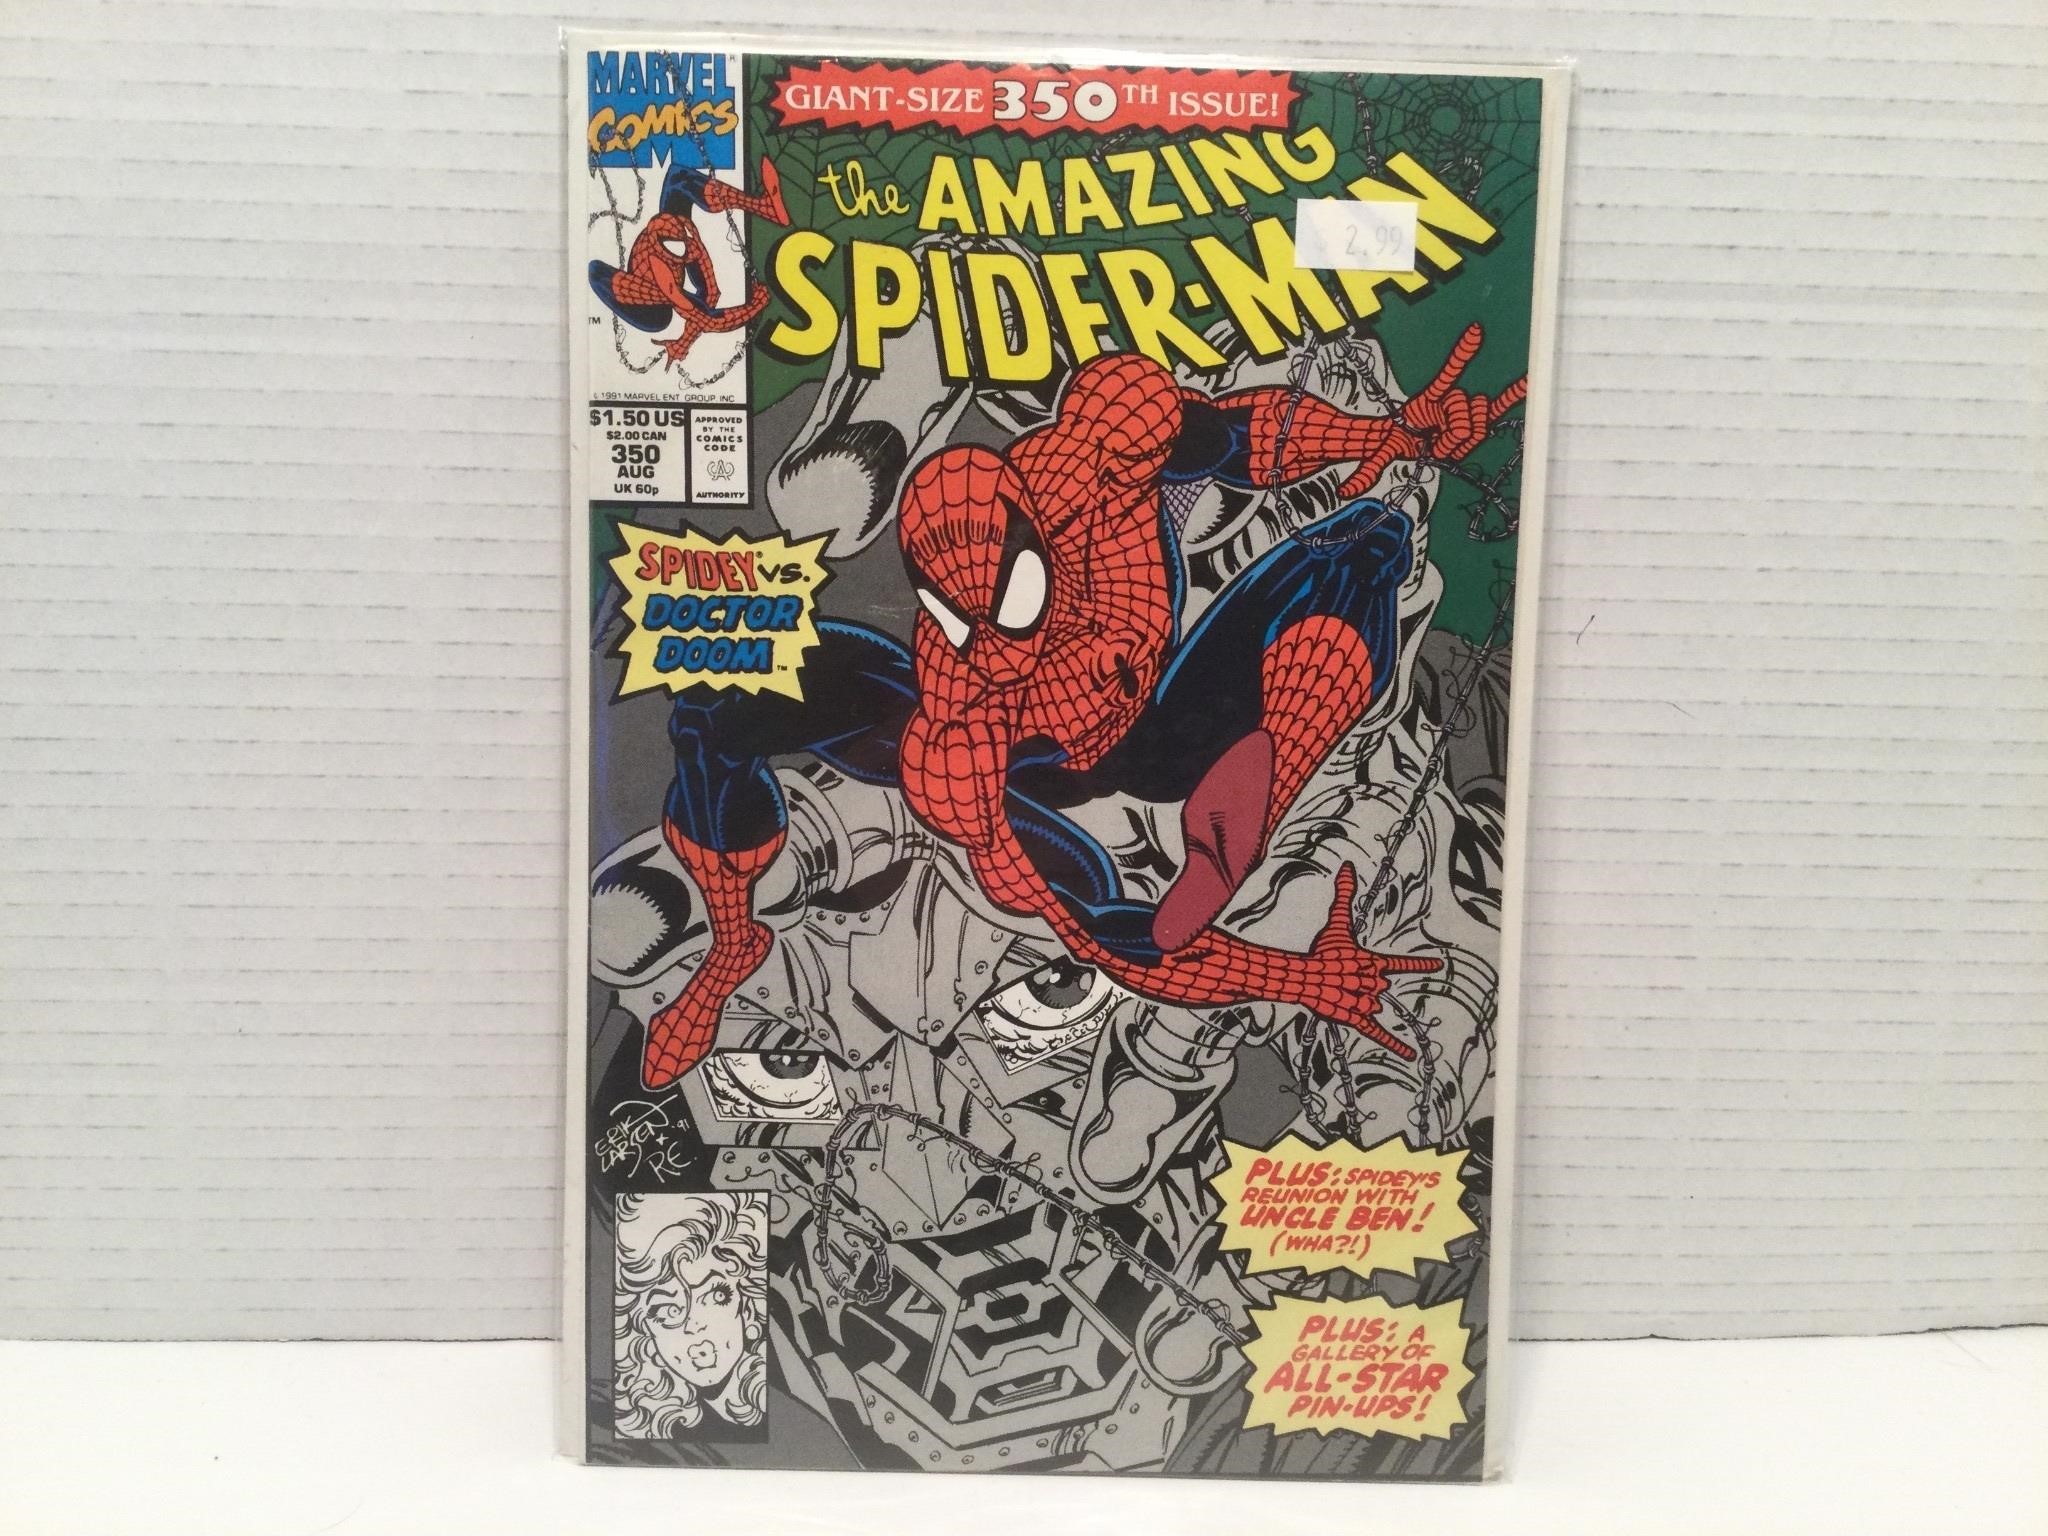 Comic Books, Hockey Cards,Baseball Cards and Marvel/DC Cards